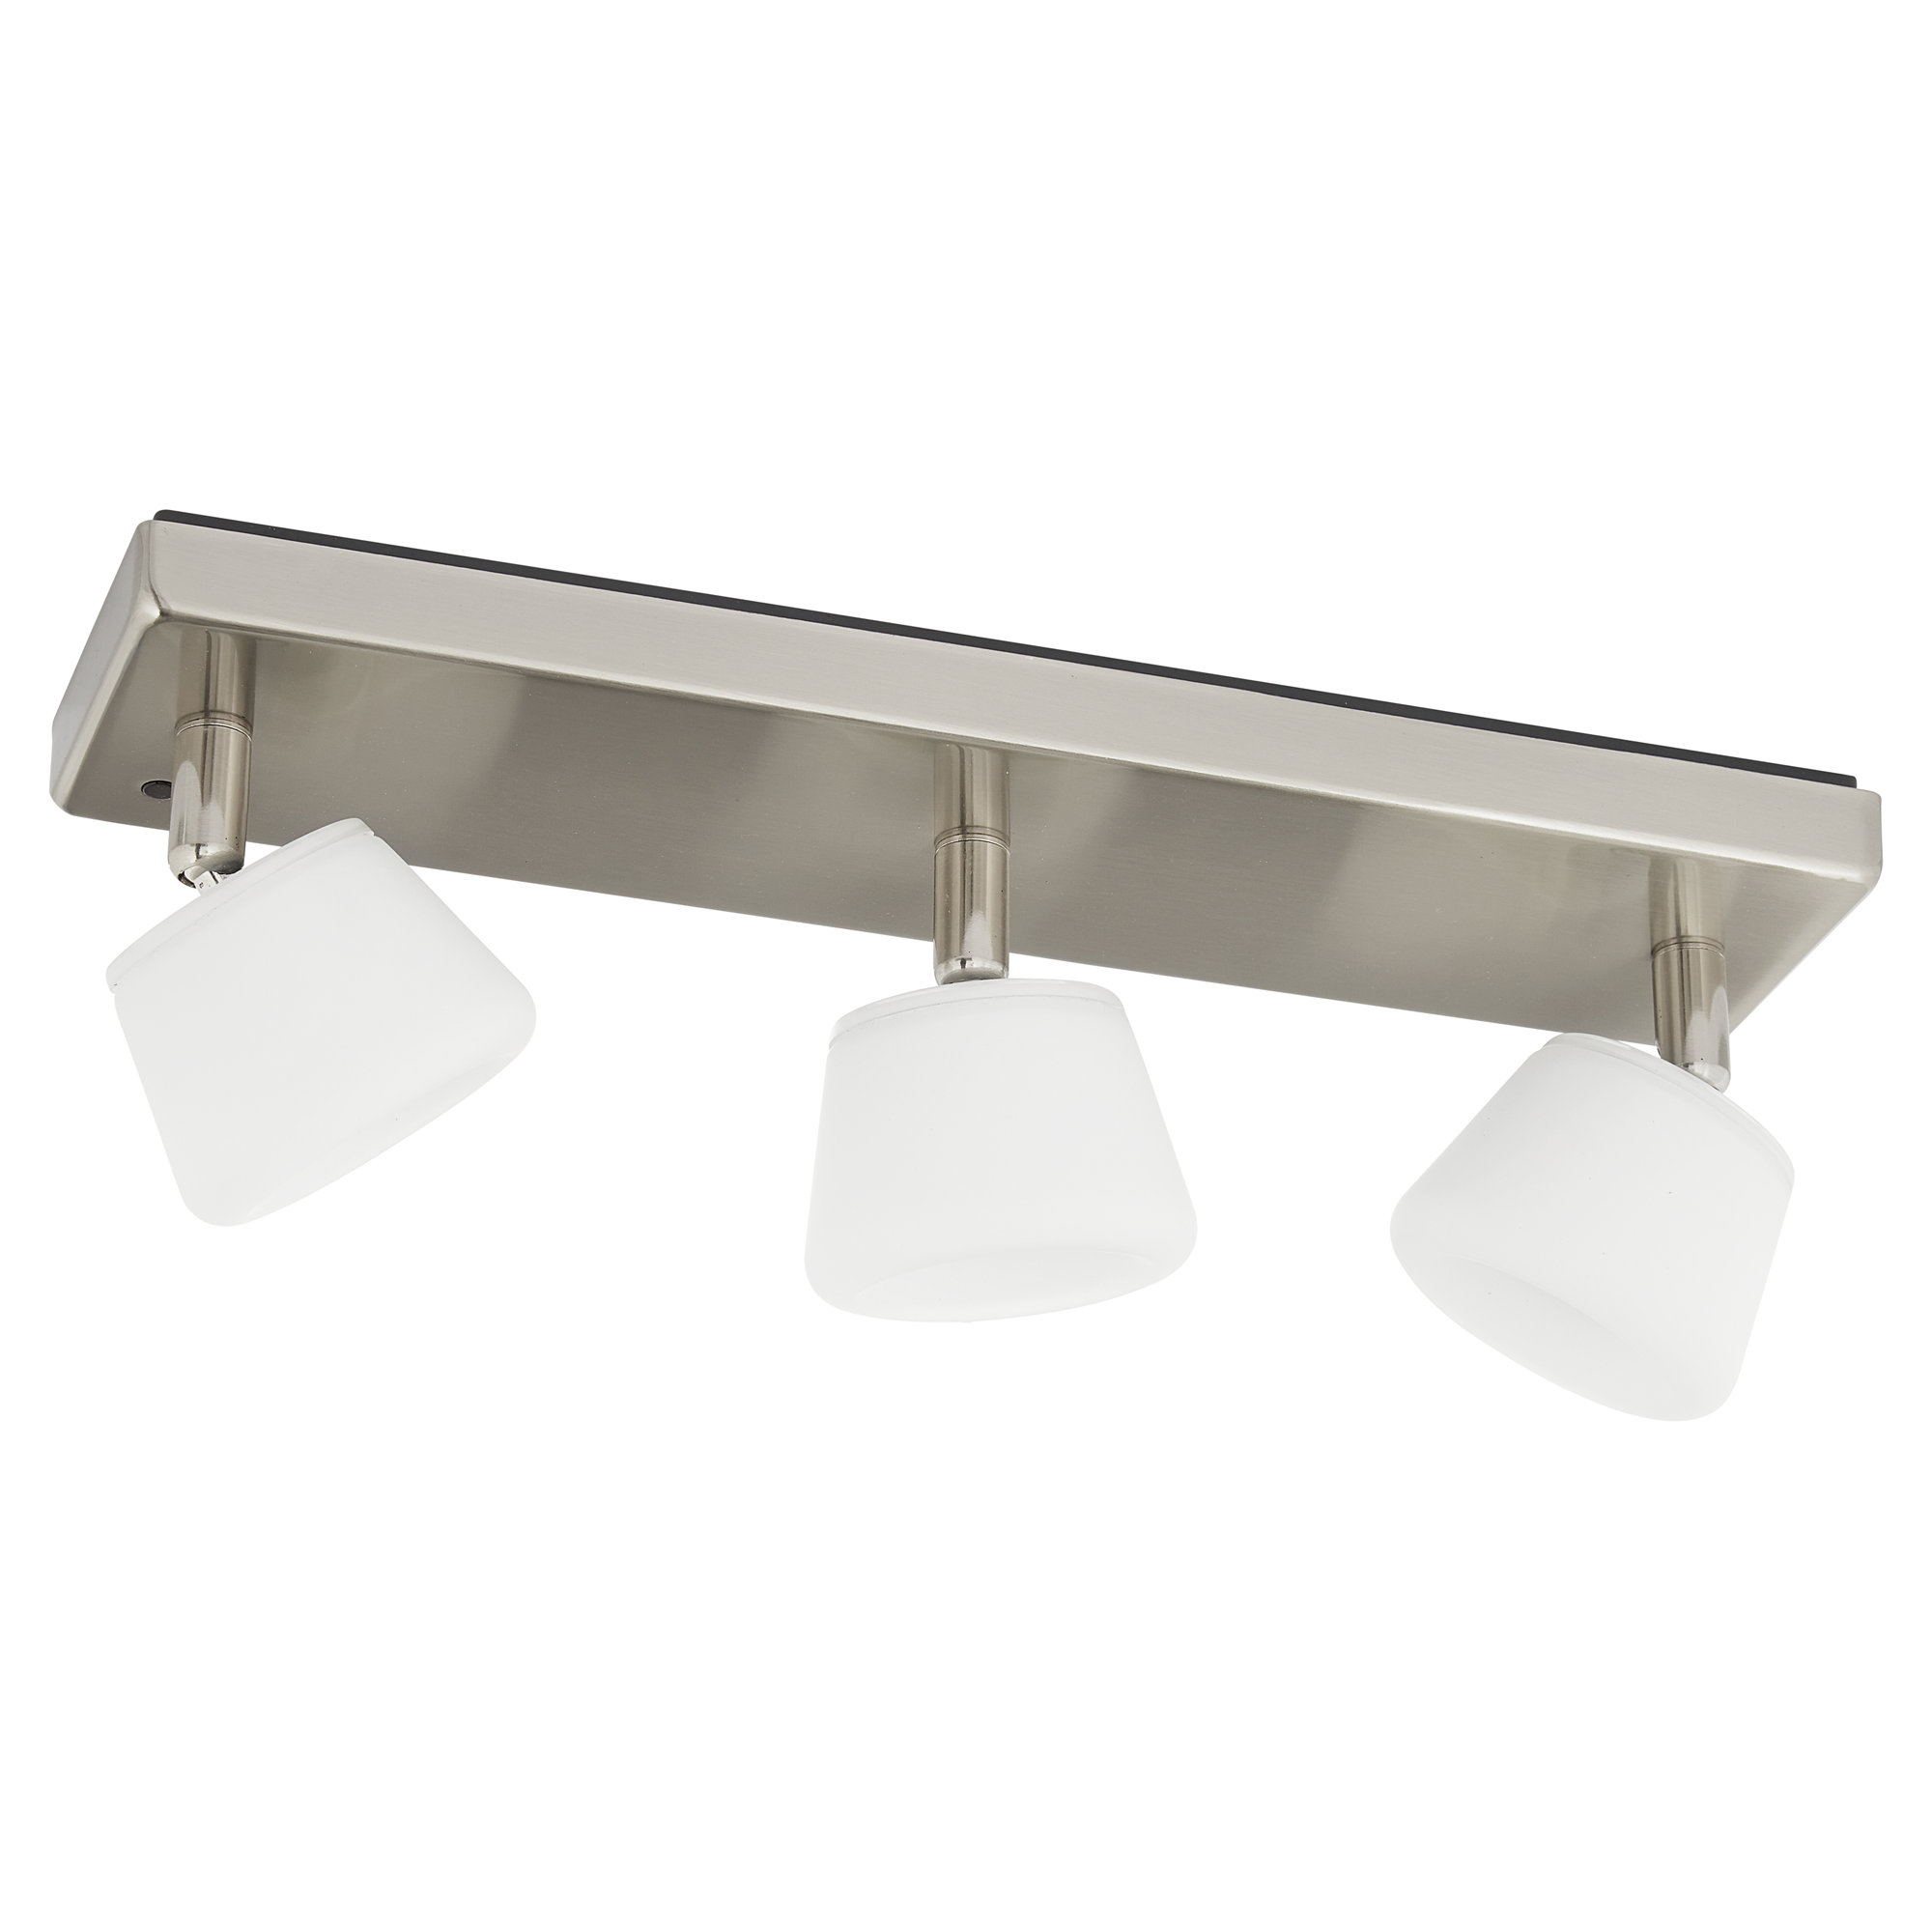 LED-Strahler 'iDual' Emerald Farbwechsel 18,5 W 360 x 90 mm 3-flammig + product picture